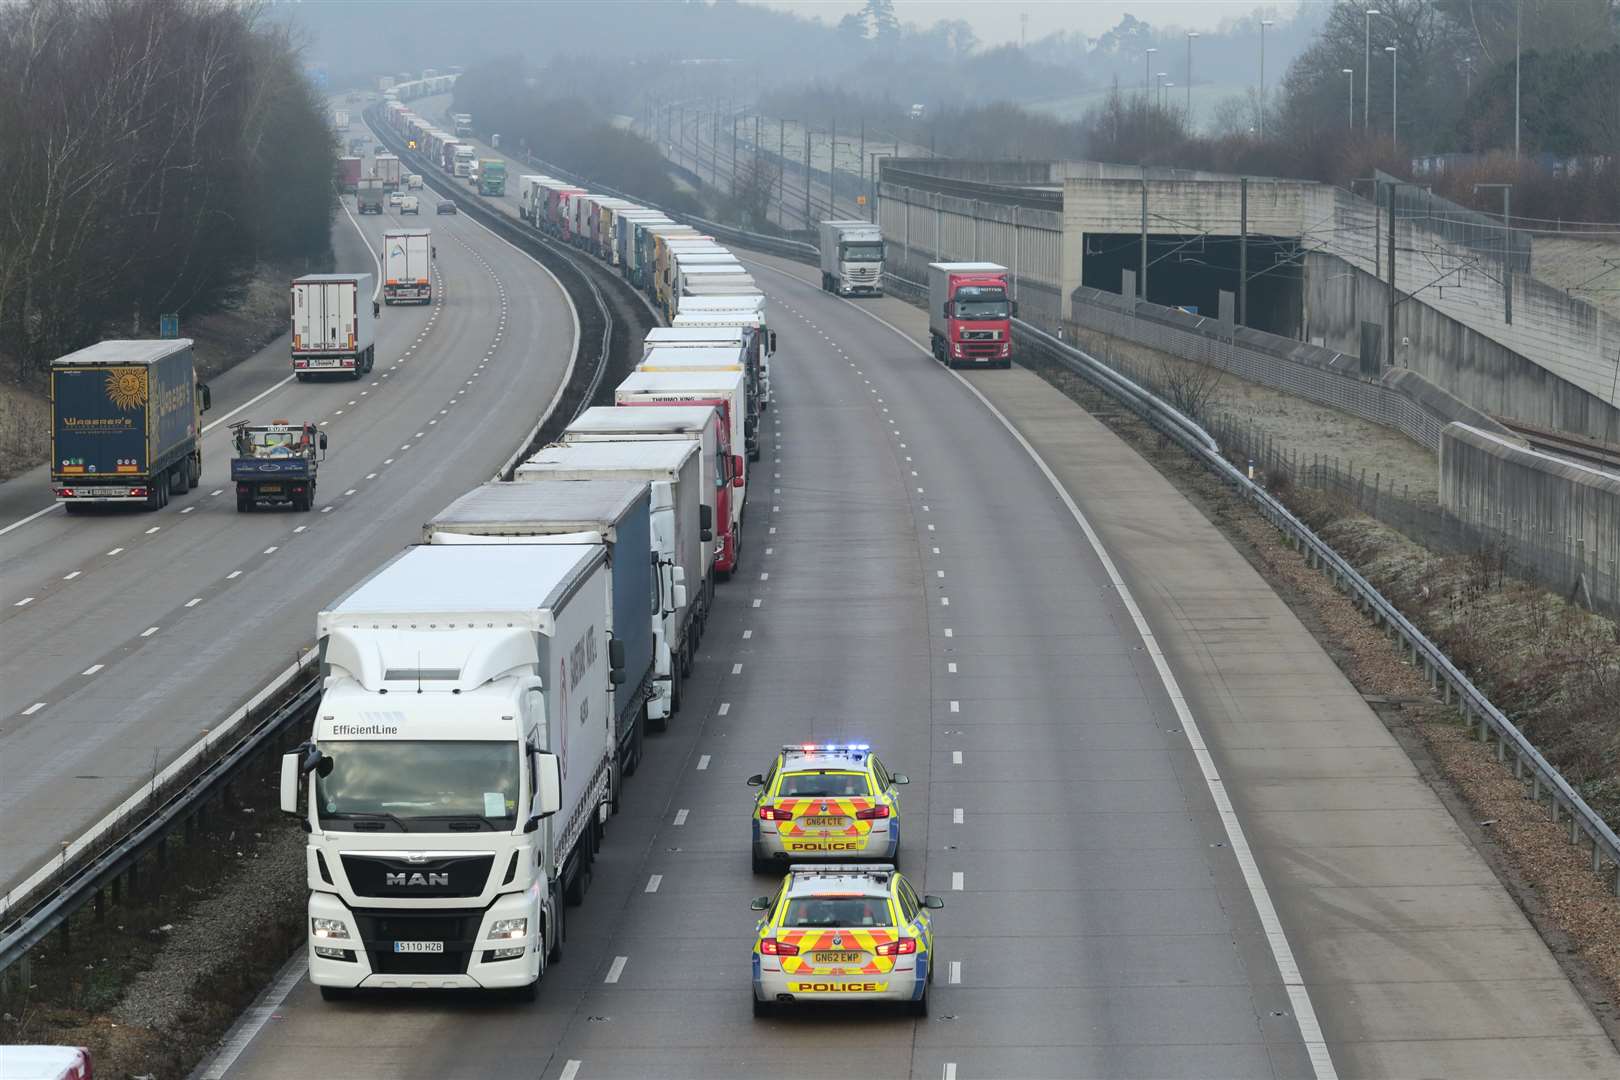 Operation Stack on the M20 was patrolled by Kent Police